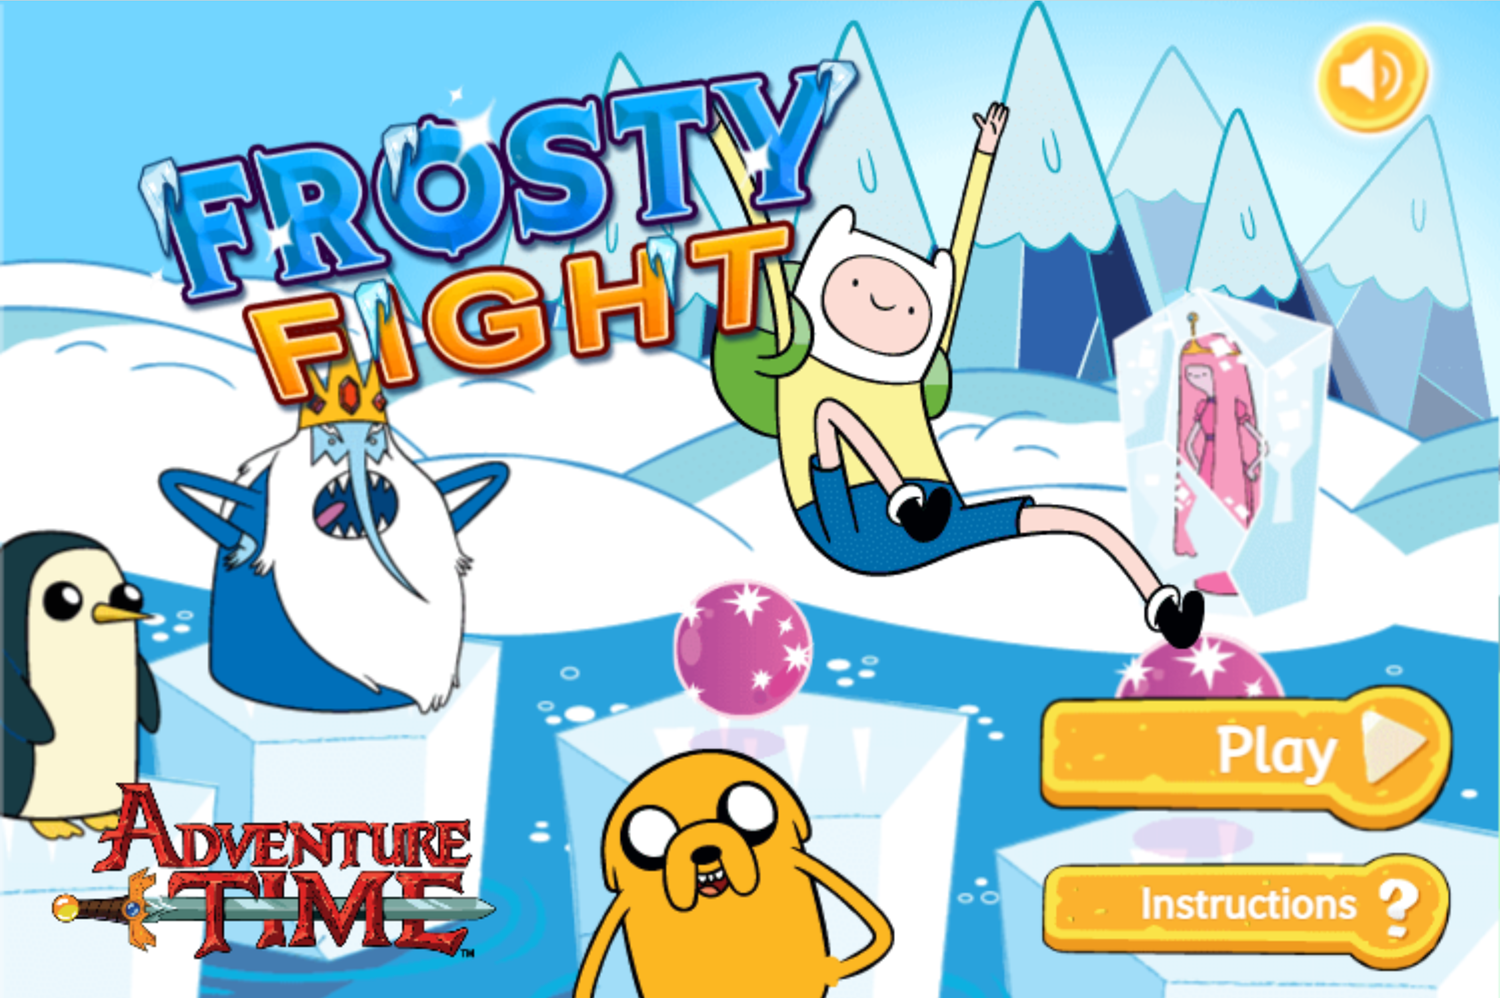 Adventure Time Frosty Fight Welcome Screen Screenshot.